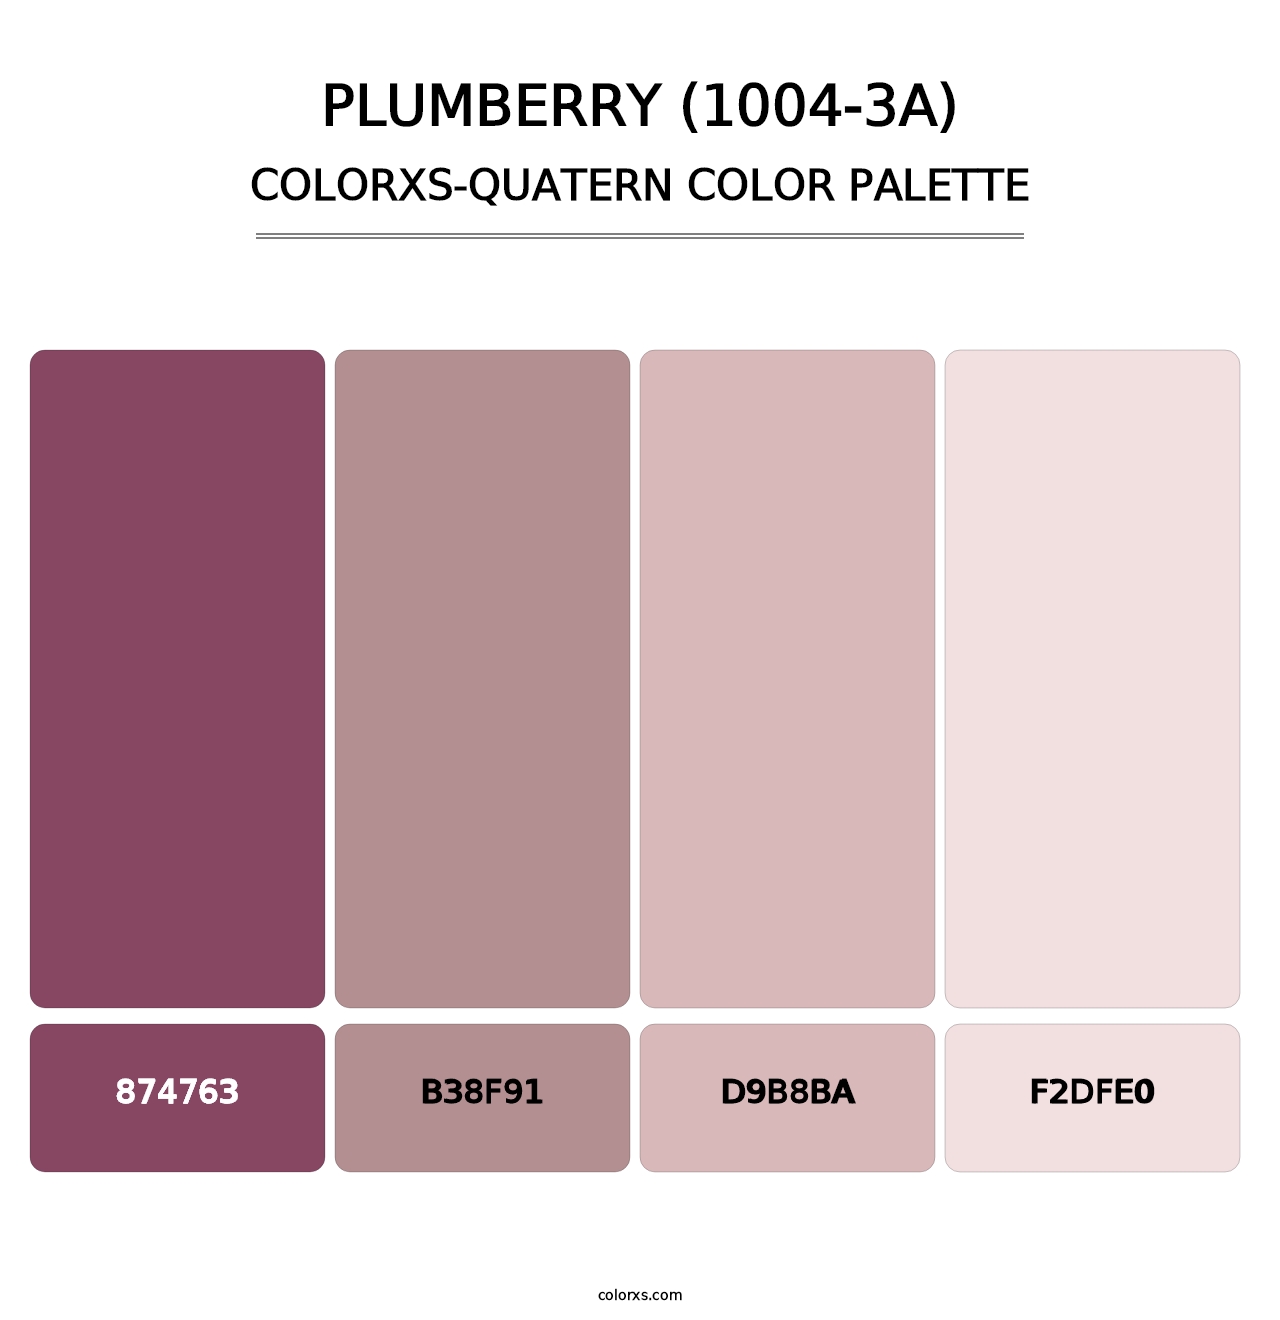 Plumberry (1004-3A) - Colorxs Quatern Palette